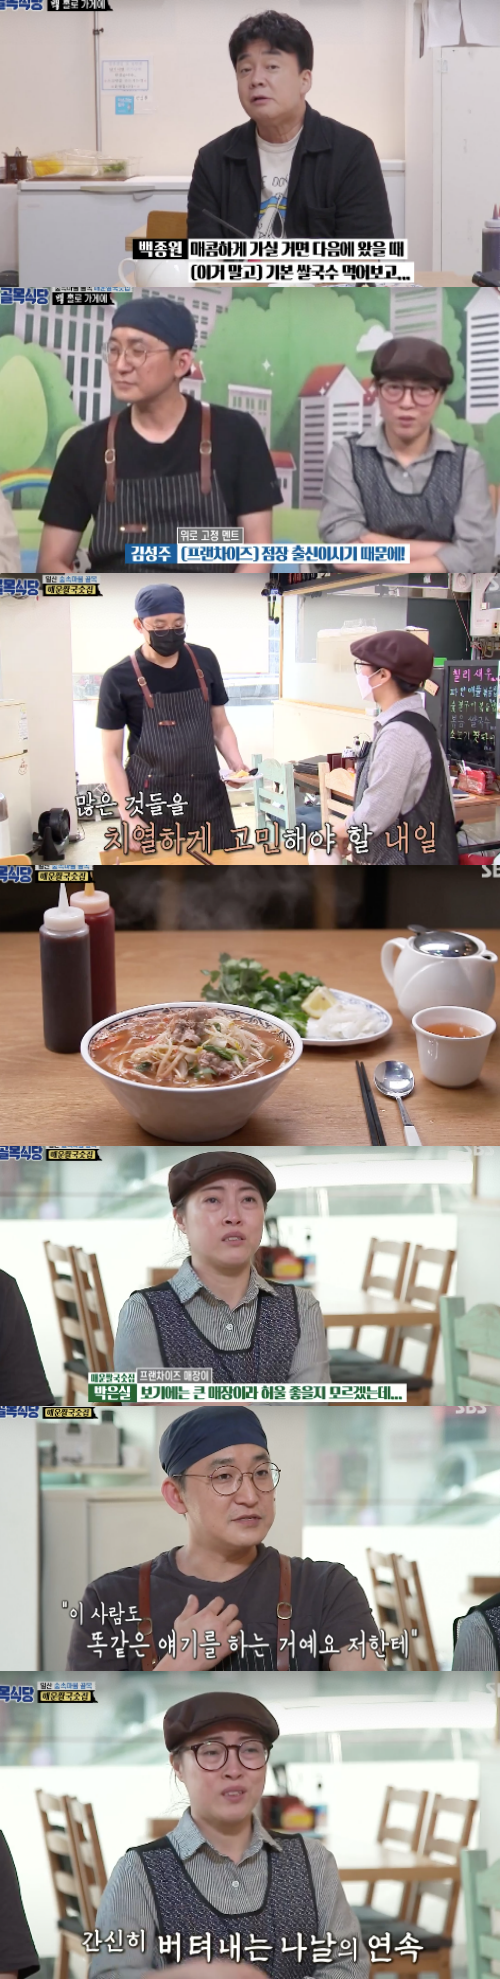 In the alley restaurant of Baek Jong-won, the president of the spicy rice noodle house told a sad story of paying 600 million won in debt, while Gil-dong and the daily Pasta house were in a confrontation, and Seventeen was on the run.The Ilsan Forest Village Alley was drawn at the SBS entertainment Baek Jong-wons Alley Restaurant broadcast on the 23rd.On the same day, the solution of the Ilsan forest village alley started, and I met from the spicy rice noodle house.I heard about the spicy rice noodle house. First, my husband bought the Francise rice noodle house, and said that the debt caused by the loan was about 400 million won.Since then, there are many rice noodles, so sales are decreasing and fixed spending is difficult to handle.In addition, my wife was saddened by the fact that she had more than 600 million debts now when she opened the current store with additional loans to earn living expenses.Eventually, her husband closed the existing Francise rice noodle house and was in Vic-Fezensac with her wife.Baek Jong-won visited and the couple moved to the situation room. My wife smiled, saying, I am an assistant.They met at the age of 19 and said, I met at the age of 20 and love was seven years and 22 years since I married.Kim Seong-joo asked the difference from the general store, saying, It is the first time I have had a Franchise manager.I have a small daily burden, but I have a financial burden at the end of the month rather than a franchise store, said the husband. I have a salary, but I have all the responsibilities.In addition, it is a pity that the amount of debt among the performers of the alley restaurant is the highest.The two couples said, The situation has deteriorated to keep the store. Even if Vic-Fezensac does not have a net profit, it is only negative, and I thought that people are dying.Baek Jong-won decided to take a look at The Kitchen after tasting the rice noodles made by the two bosses.It will not be easy to organize because there are many menus, said Baek Jong-won, and Kim Seong-joo also cheered, The Kitchen management and arrangement are well done because it is from Francise manager.Baek Jong-won visited the agui steamer; asked about the change in the recipe, and each decided to present a recipe tailored to his mouth.They completed the dish, and Baek Jong-won decided to taste it.As if the smell of the leftovers had risen, Baek Jong-won said, I am excited. He tasted it and said, It is much better than when I put a butter, it is much better without butter.It turned out that instead of butter, the flavor was added by adding pepper oil and freshwater shrimp, and then the red pepper paste was not suitable for the steamed rice.I decided to taste it in the situation.Kim Seong-joo, chairman of the Seodanggae Association, said, I will take off my hand with the kochujang, but I will not mention any more. Kim Seong-joo said, I will not know the taste of the koji jjim, but I will not mention it anymore.Back at the house, Baek Jong-won tasted the new recipe, and said, I do not have a difference from Kim Seong-joo regular Agui steamed, but frankly, there is no difference between the three stores. If the color of the taste is different, He moved to The Kitchen to figure out the cause.Baek Jong-won met Pastas wife and wife, saying, The most important thing about starting a business is benchmarking, adding, The process that should have gone through before opening a store, I feel a little late now.Then, after tasting, Baek Jong-won said, Honestly, it is just in my mouth. From the customers point of view, I do not know about the 12,000 won pomodo, compared to my experience.Then, a special event for the visual pasta house was prepared, and it was a confrontation with the president of Gildong Pasta. It was a confrontation between Gildongs 8,000 won Pasta and Ilsans 2,000 won Pasta.At this time, Idol Seventeen decided to go on a blind test.Capture Baek Jong-wons Alley Restaurant